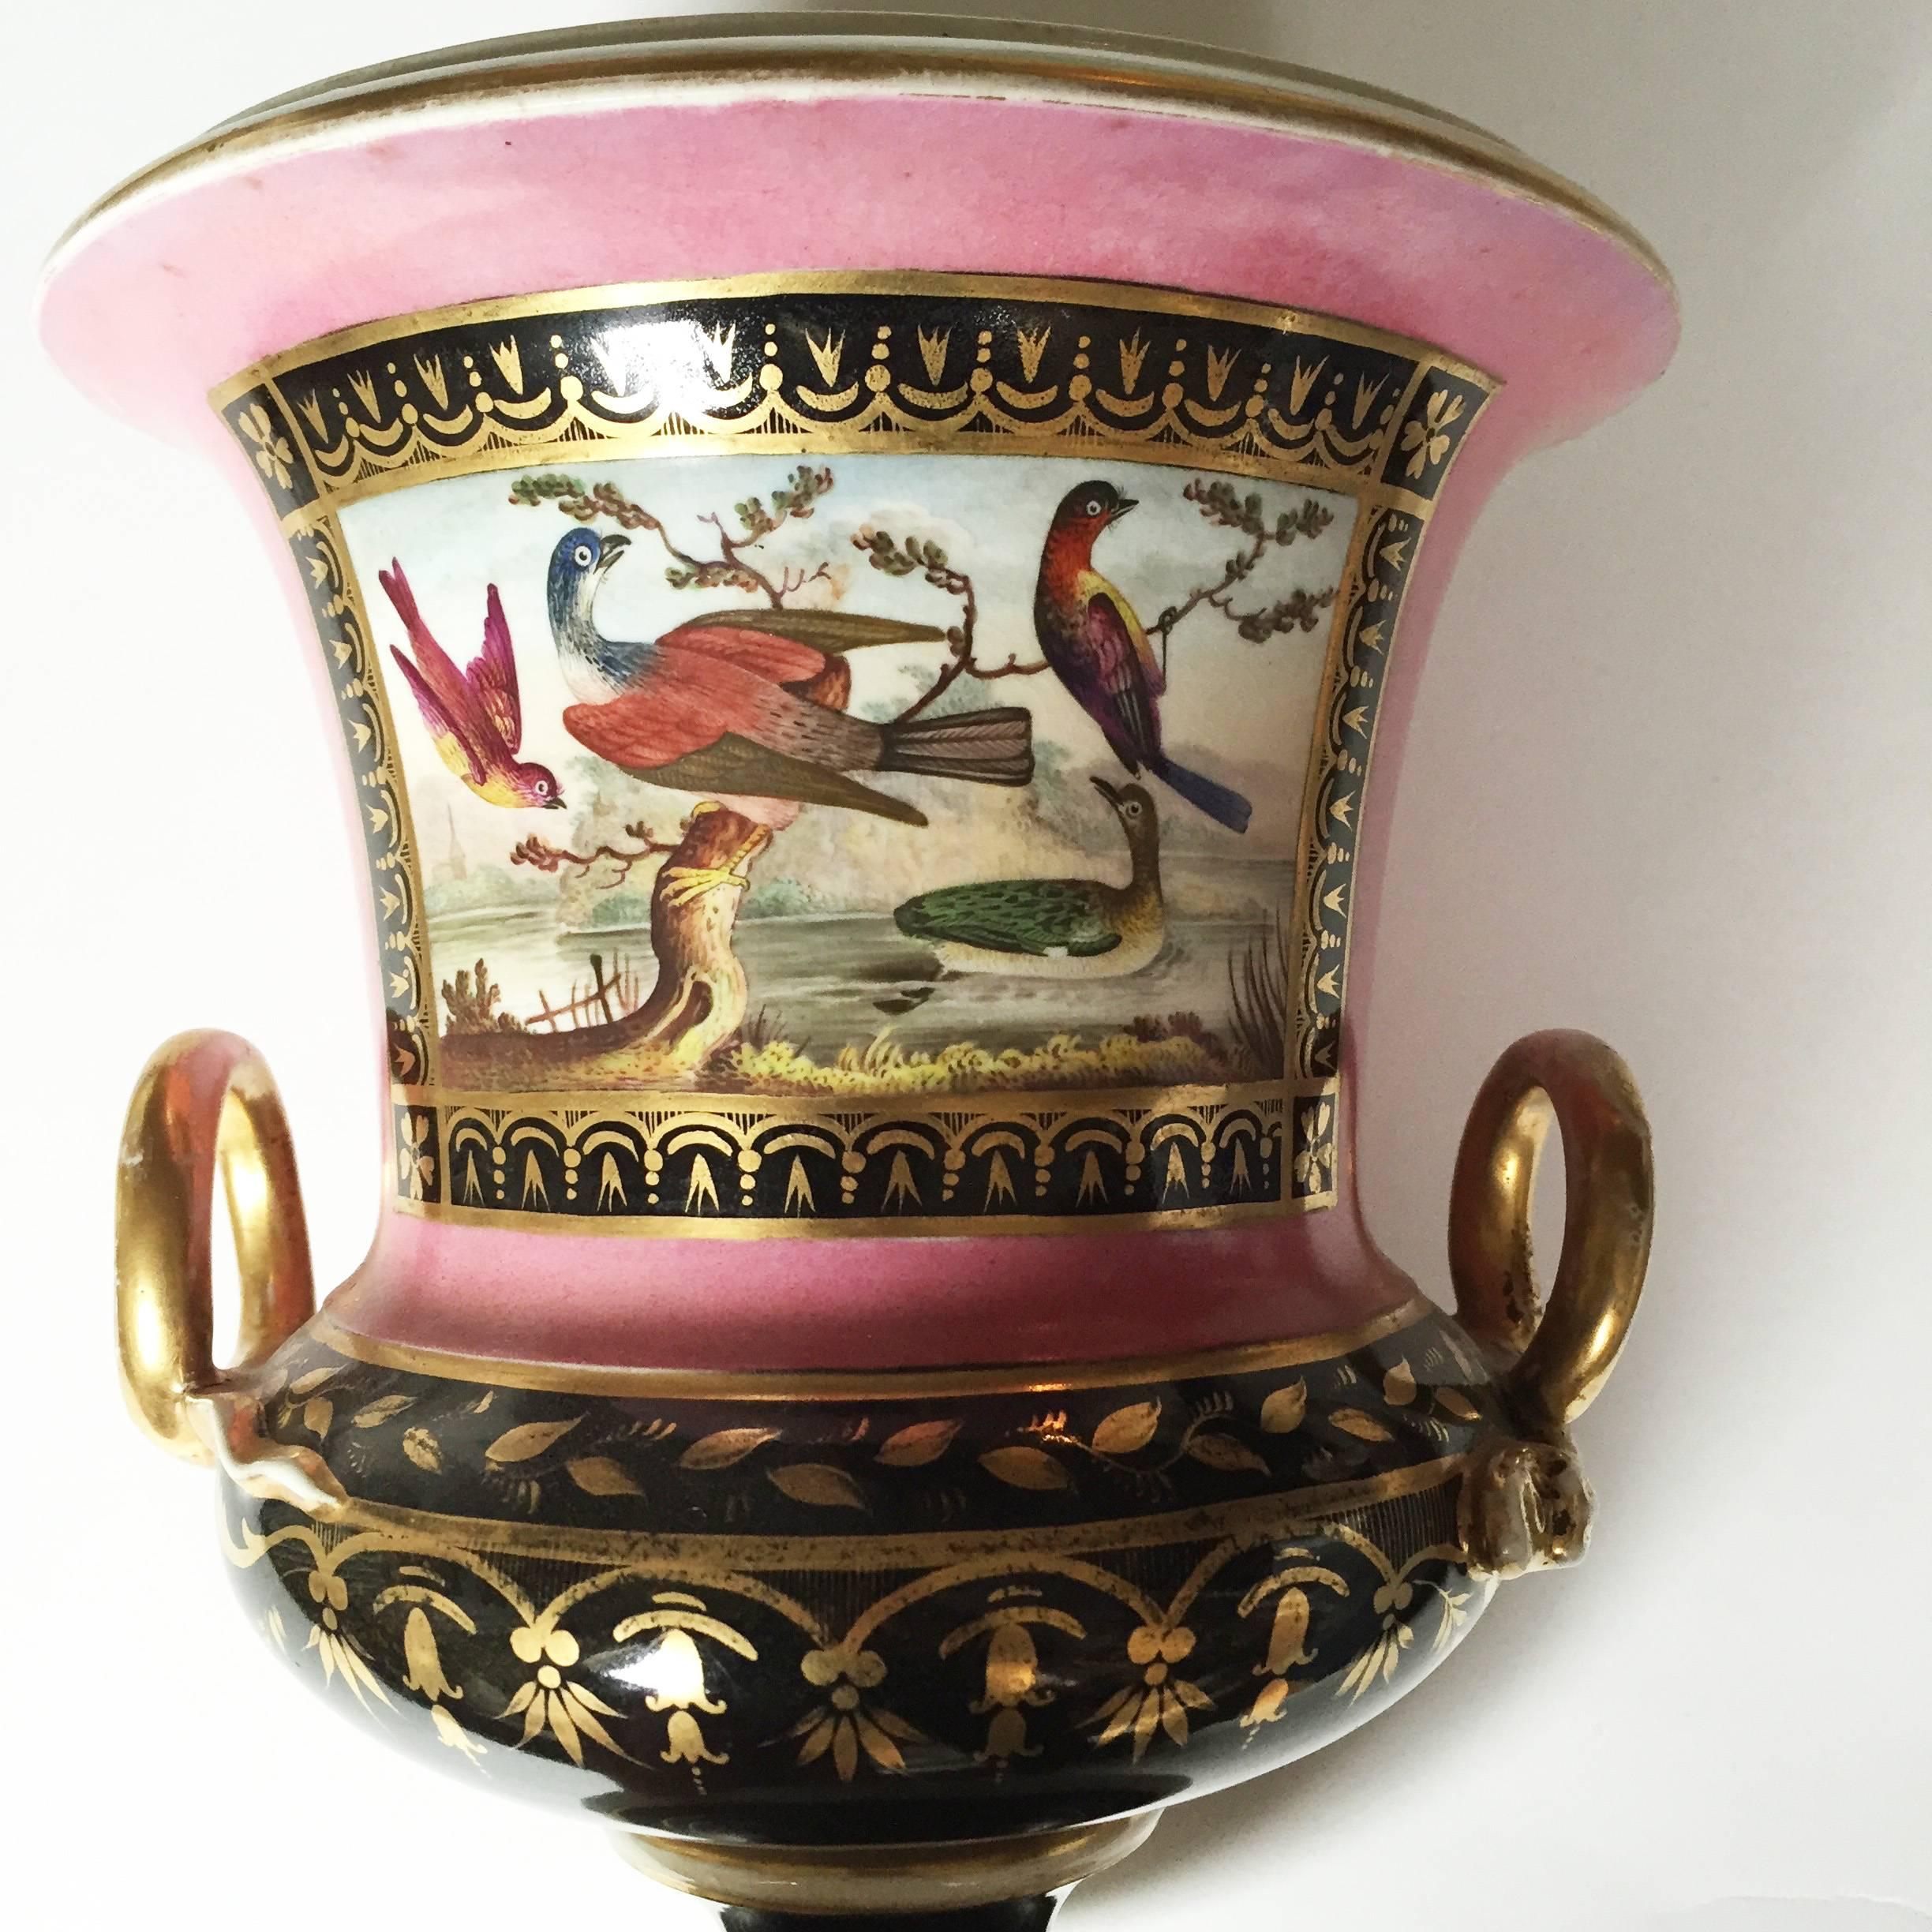 This Classic vase is painted with two ground colors, one rose pink and the other black, the campana (bell) shape body decorated with two applied looped handles molded with snake's head terminates. Both parts of the body are painted with bands of